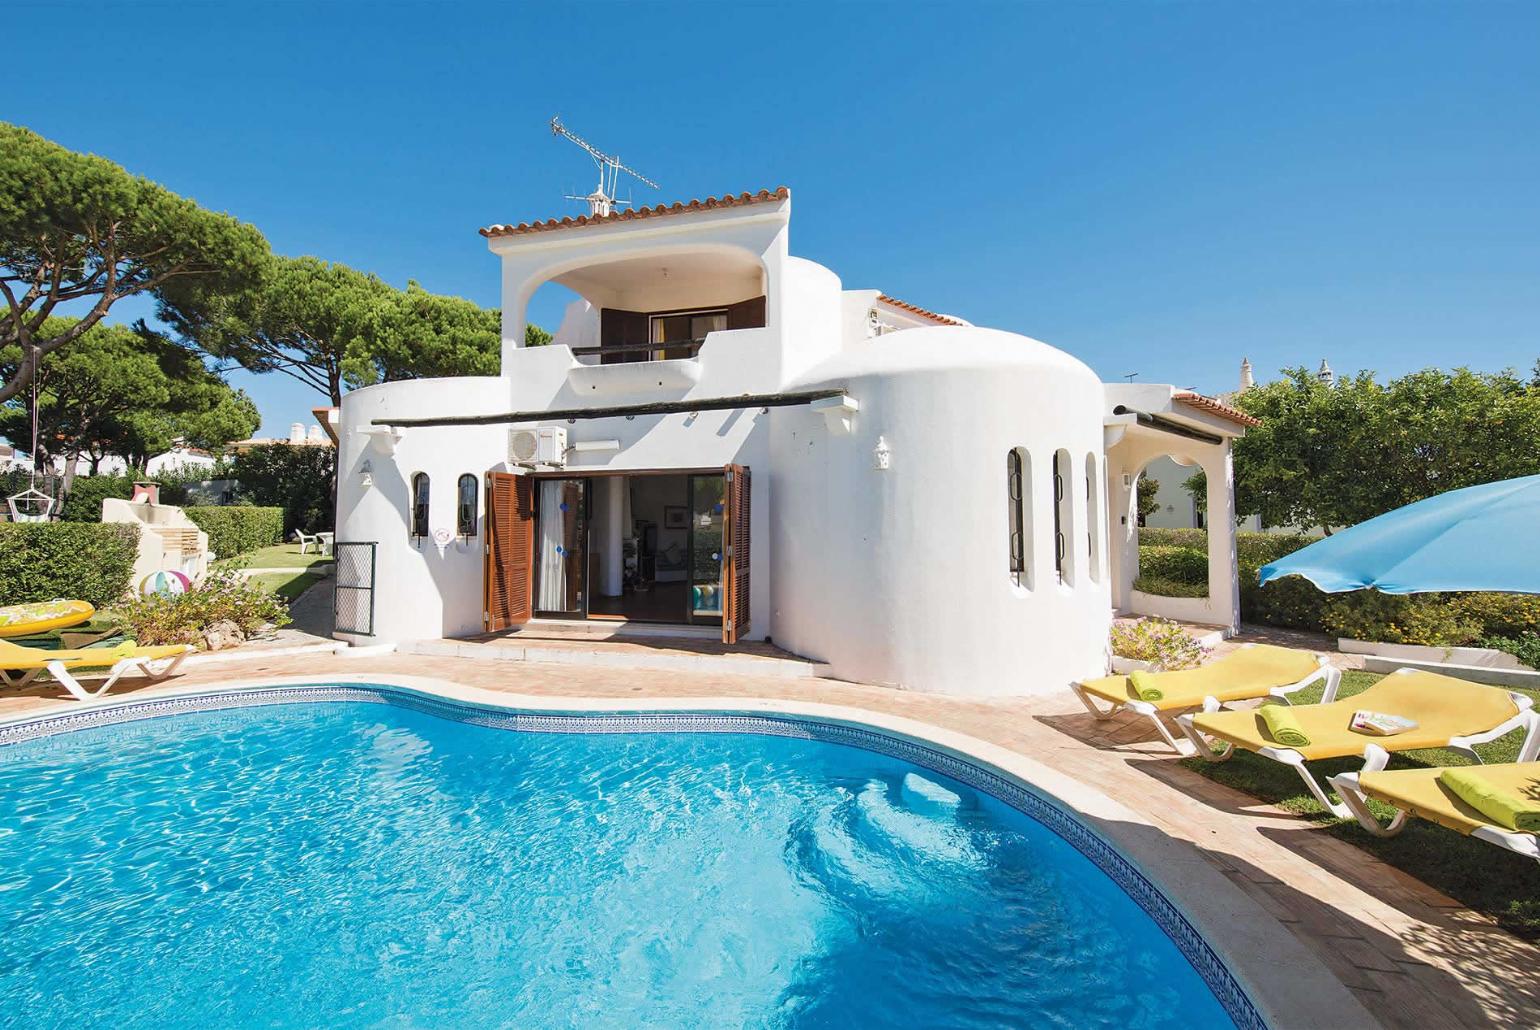 ,Beautiful villa with private pool and terrace area.